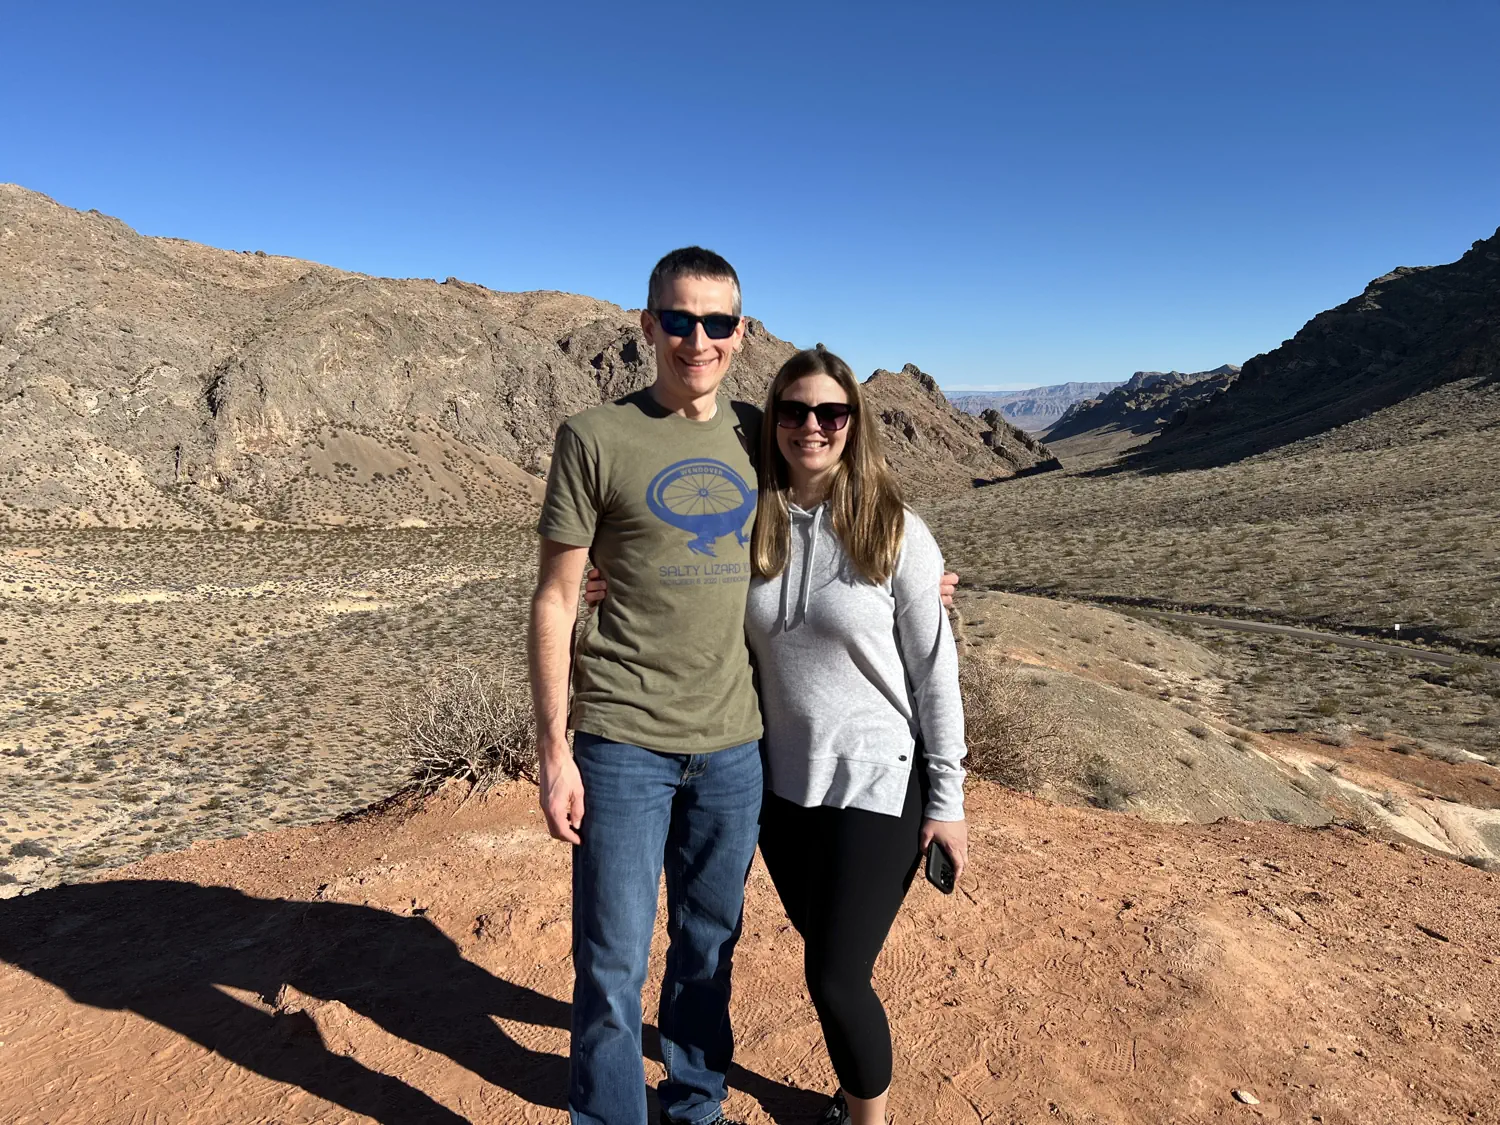 Keith and Lindsey are standing at an overlook at the entrance to Valley of Fire State Park